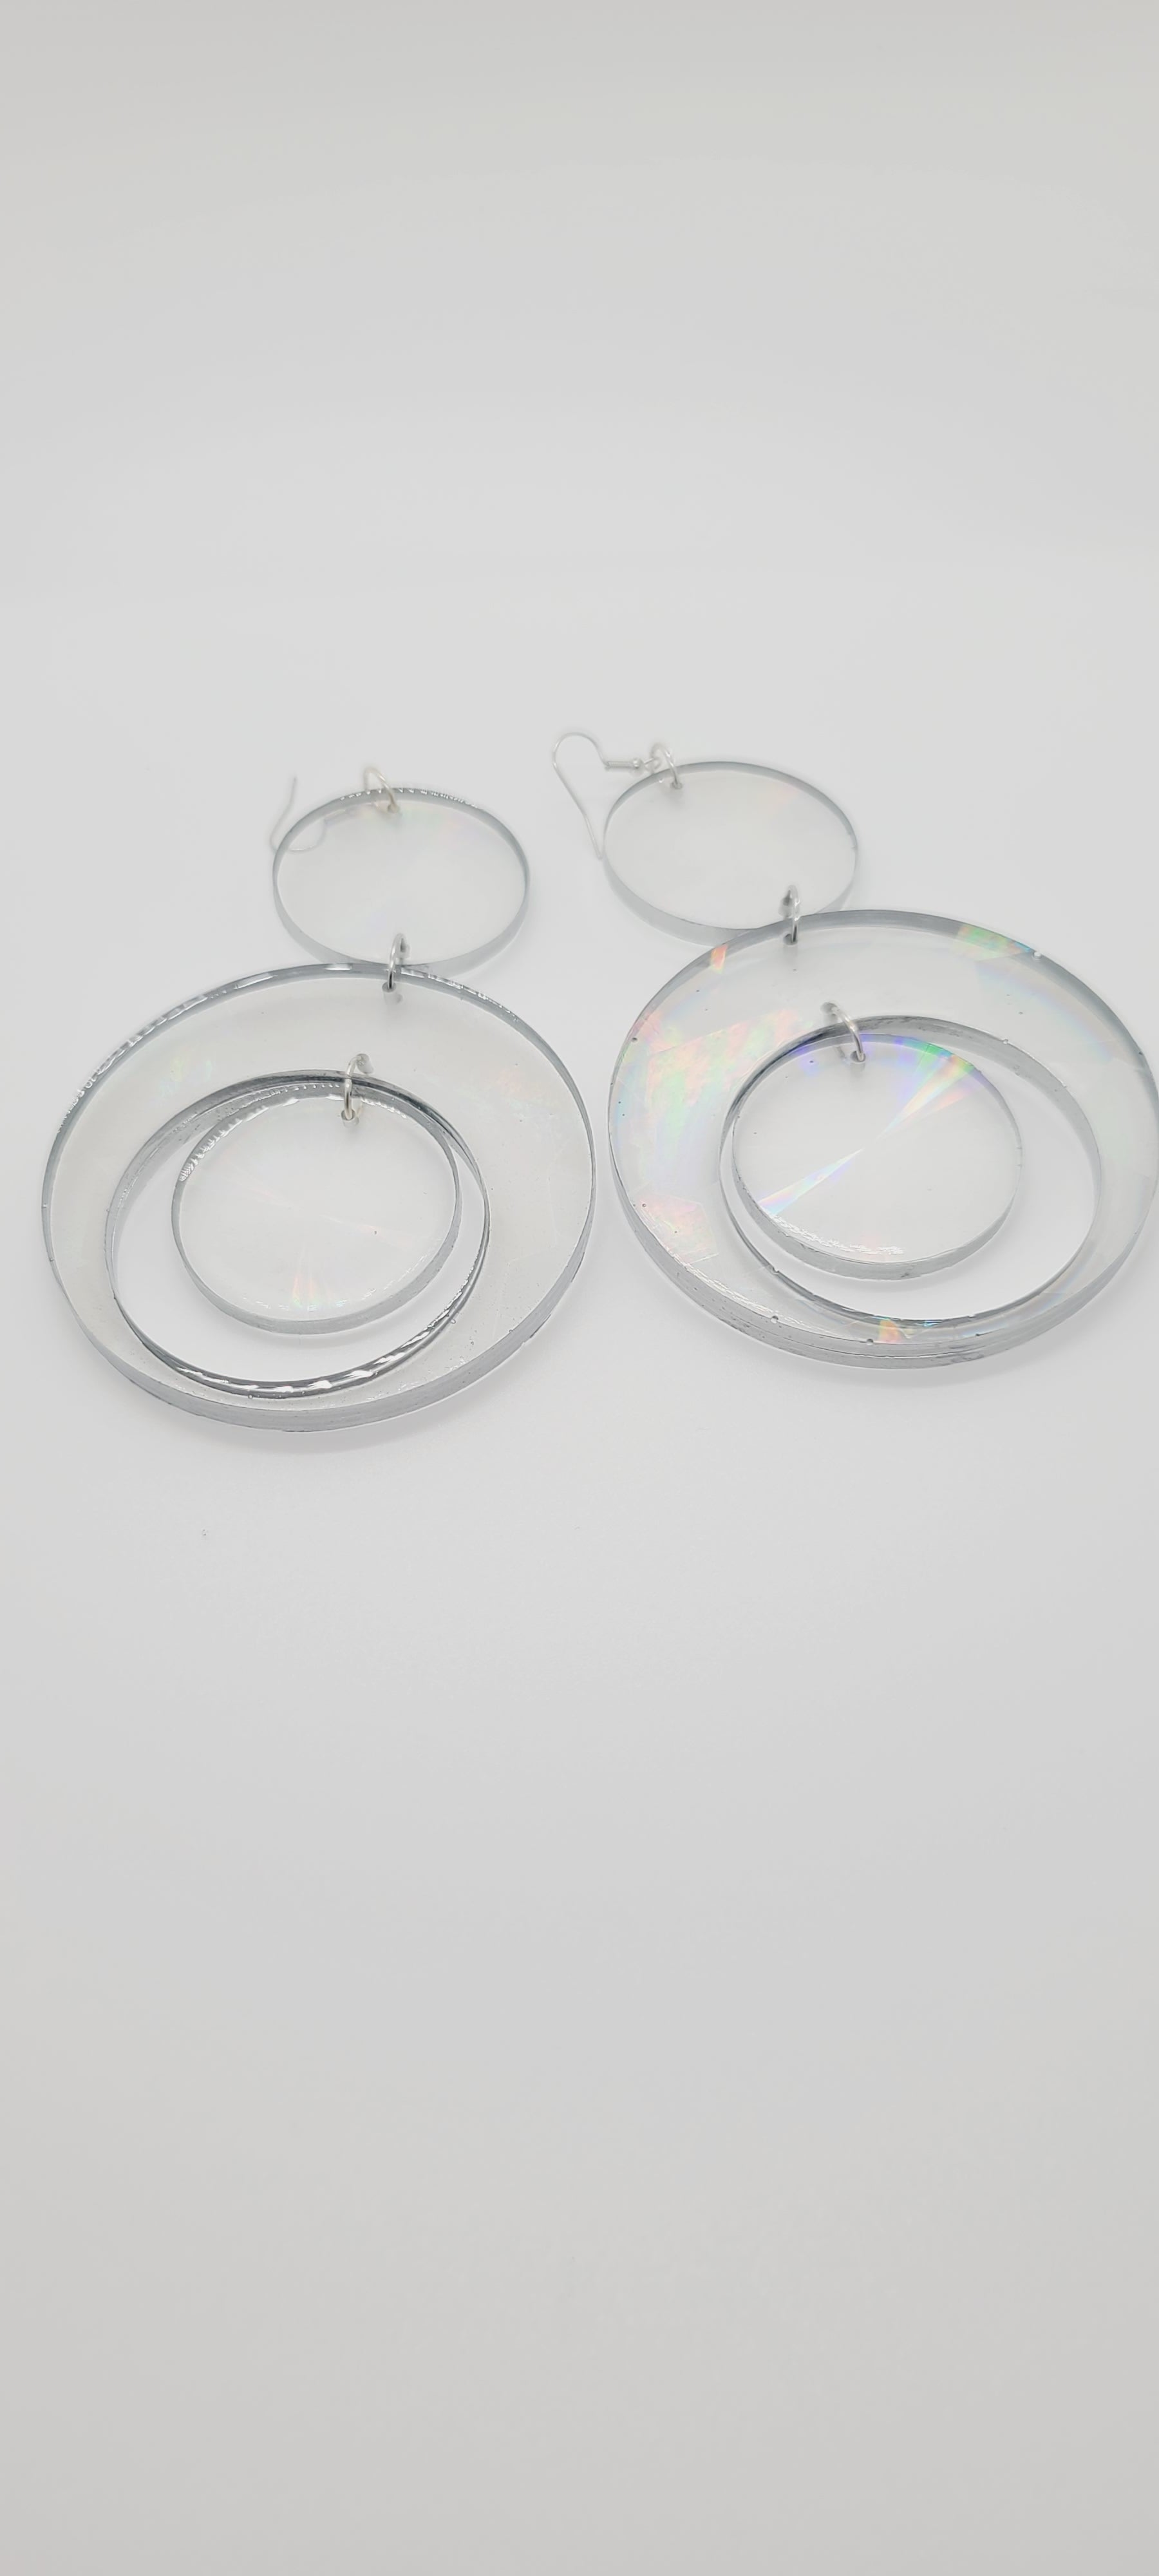 Length: 5.5 inches | Weight: 1.8 ounces  Distinctly You! These earrings are made with clear resin hologram hoops with silver edge. 